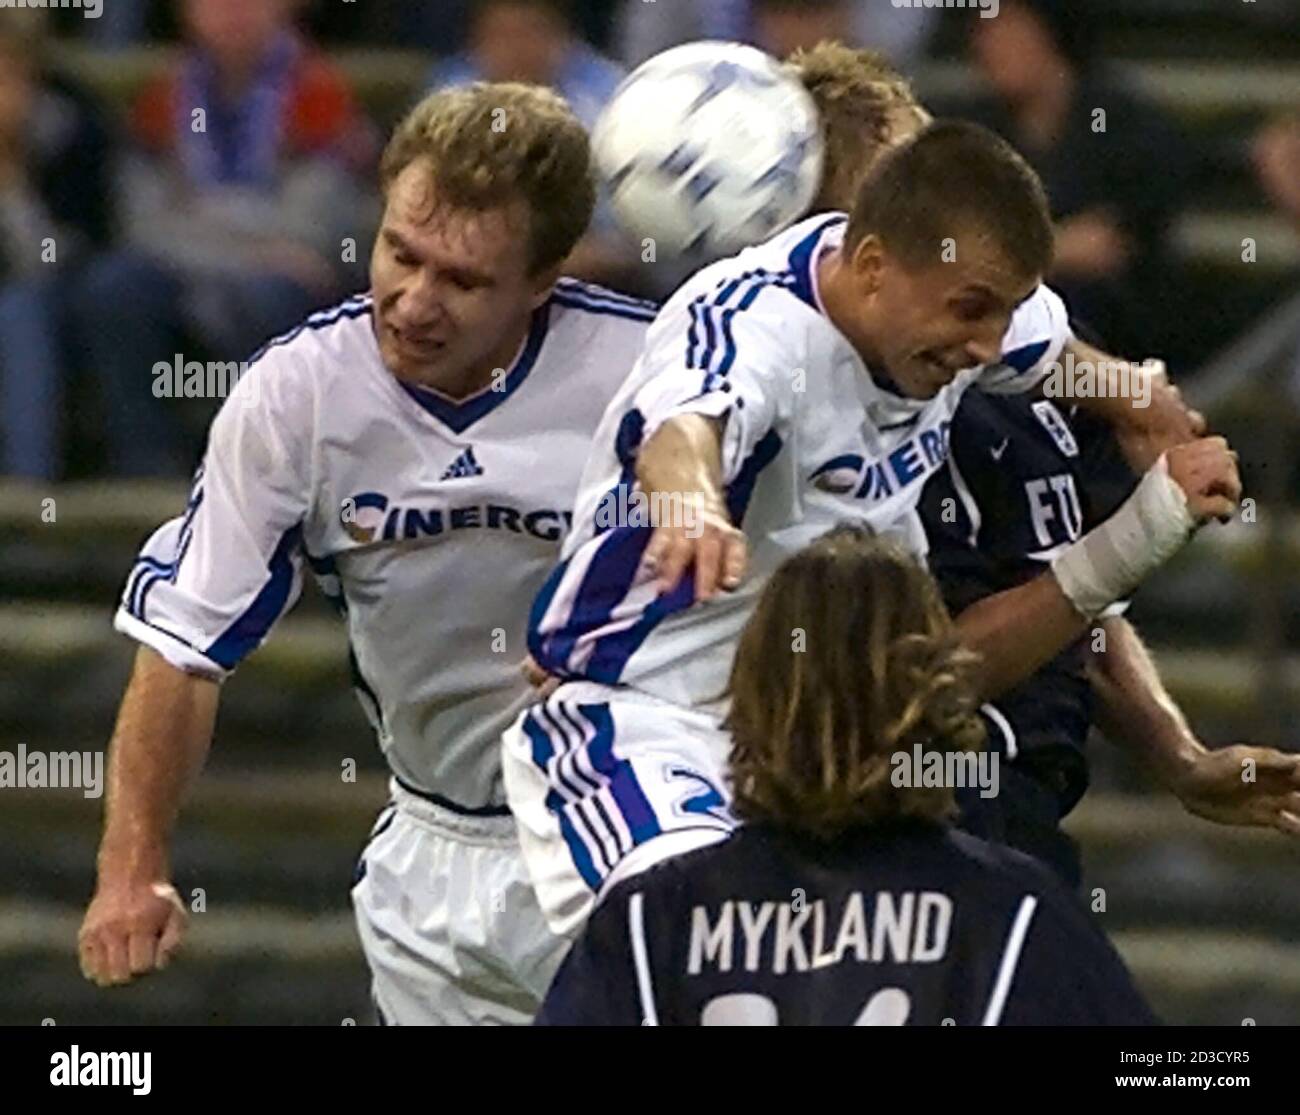 Harald Cerny (rear) of TSV 1860 Munich heads for the ball with Tuma Vitezslav (L) and Lubomir Kubica (R) of FK Drnovice during the first half of their Uefa Cup soccer match in Munich's Olympic stadium, September 26, 2000. Munich's Erik Mykland is in the foreground.  MAD Stock Photo